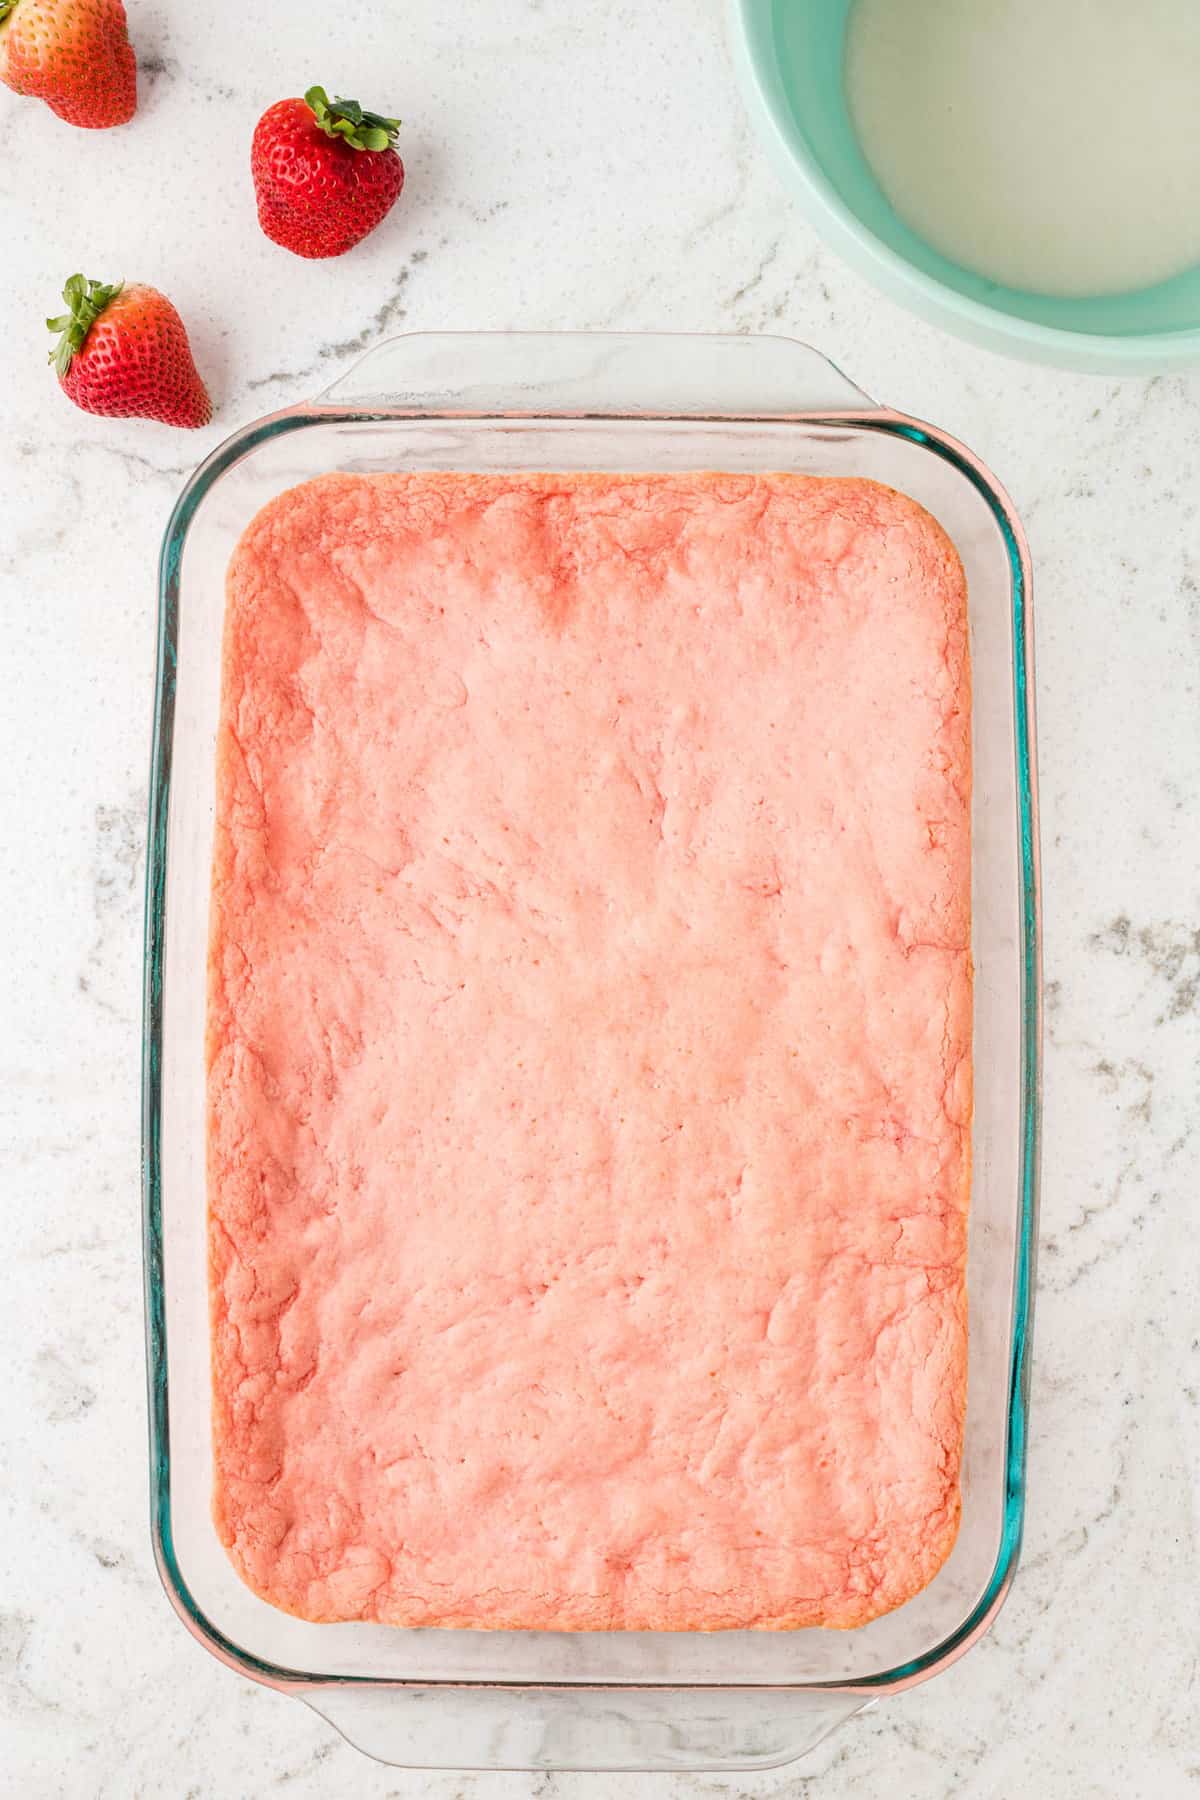 Strawberry Brownie Recipe Baked to a Golden Brown in Baking Dish